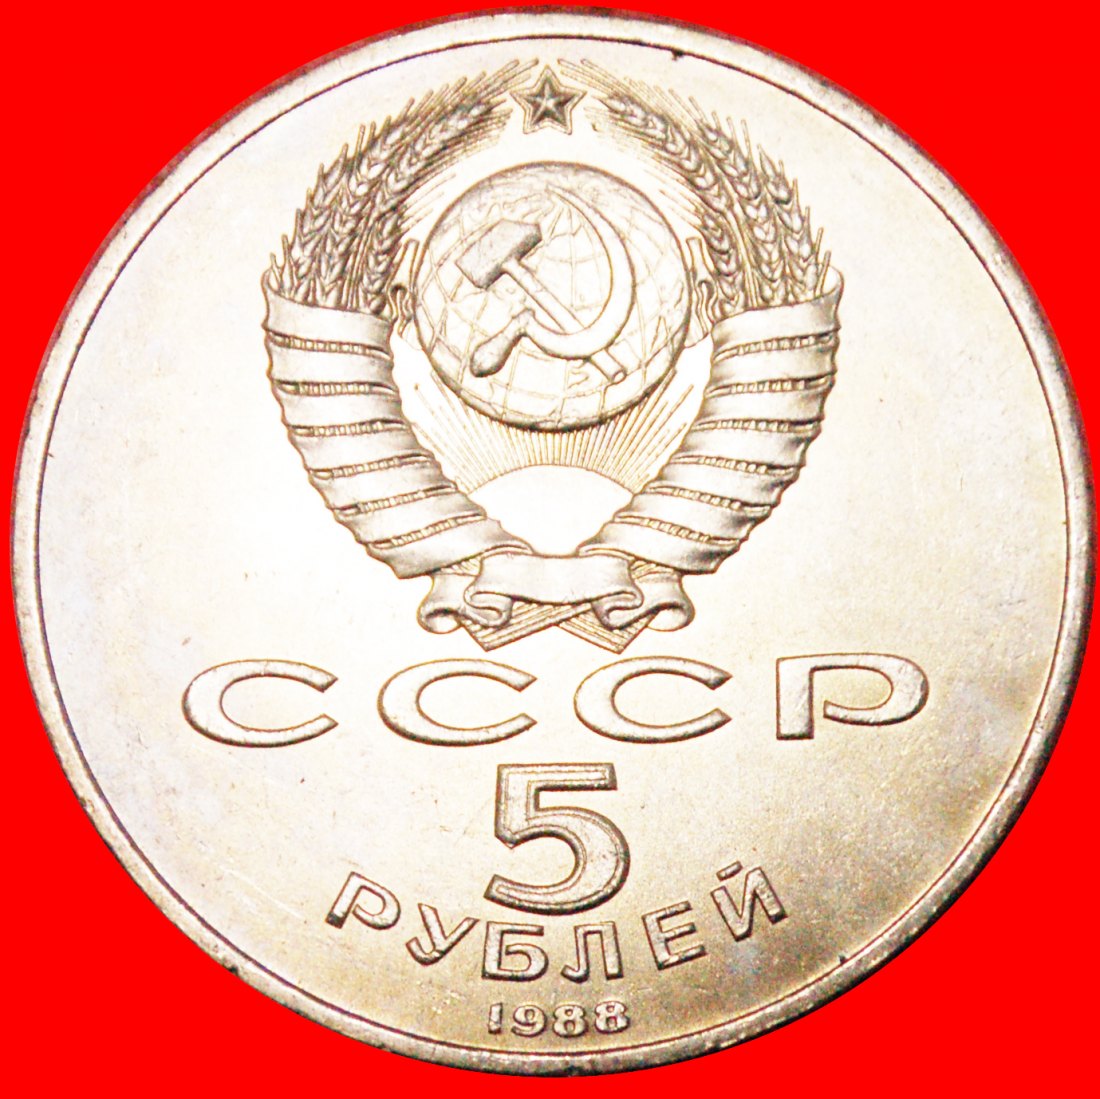  •MONOTHEISM IN RUSSIA - 1000 YEARS★USSR ex. russia★5 ROUBLES 1988 LENINGRAD★UNC★LOW START★NO RESERVE   